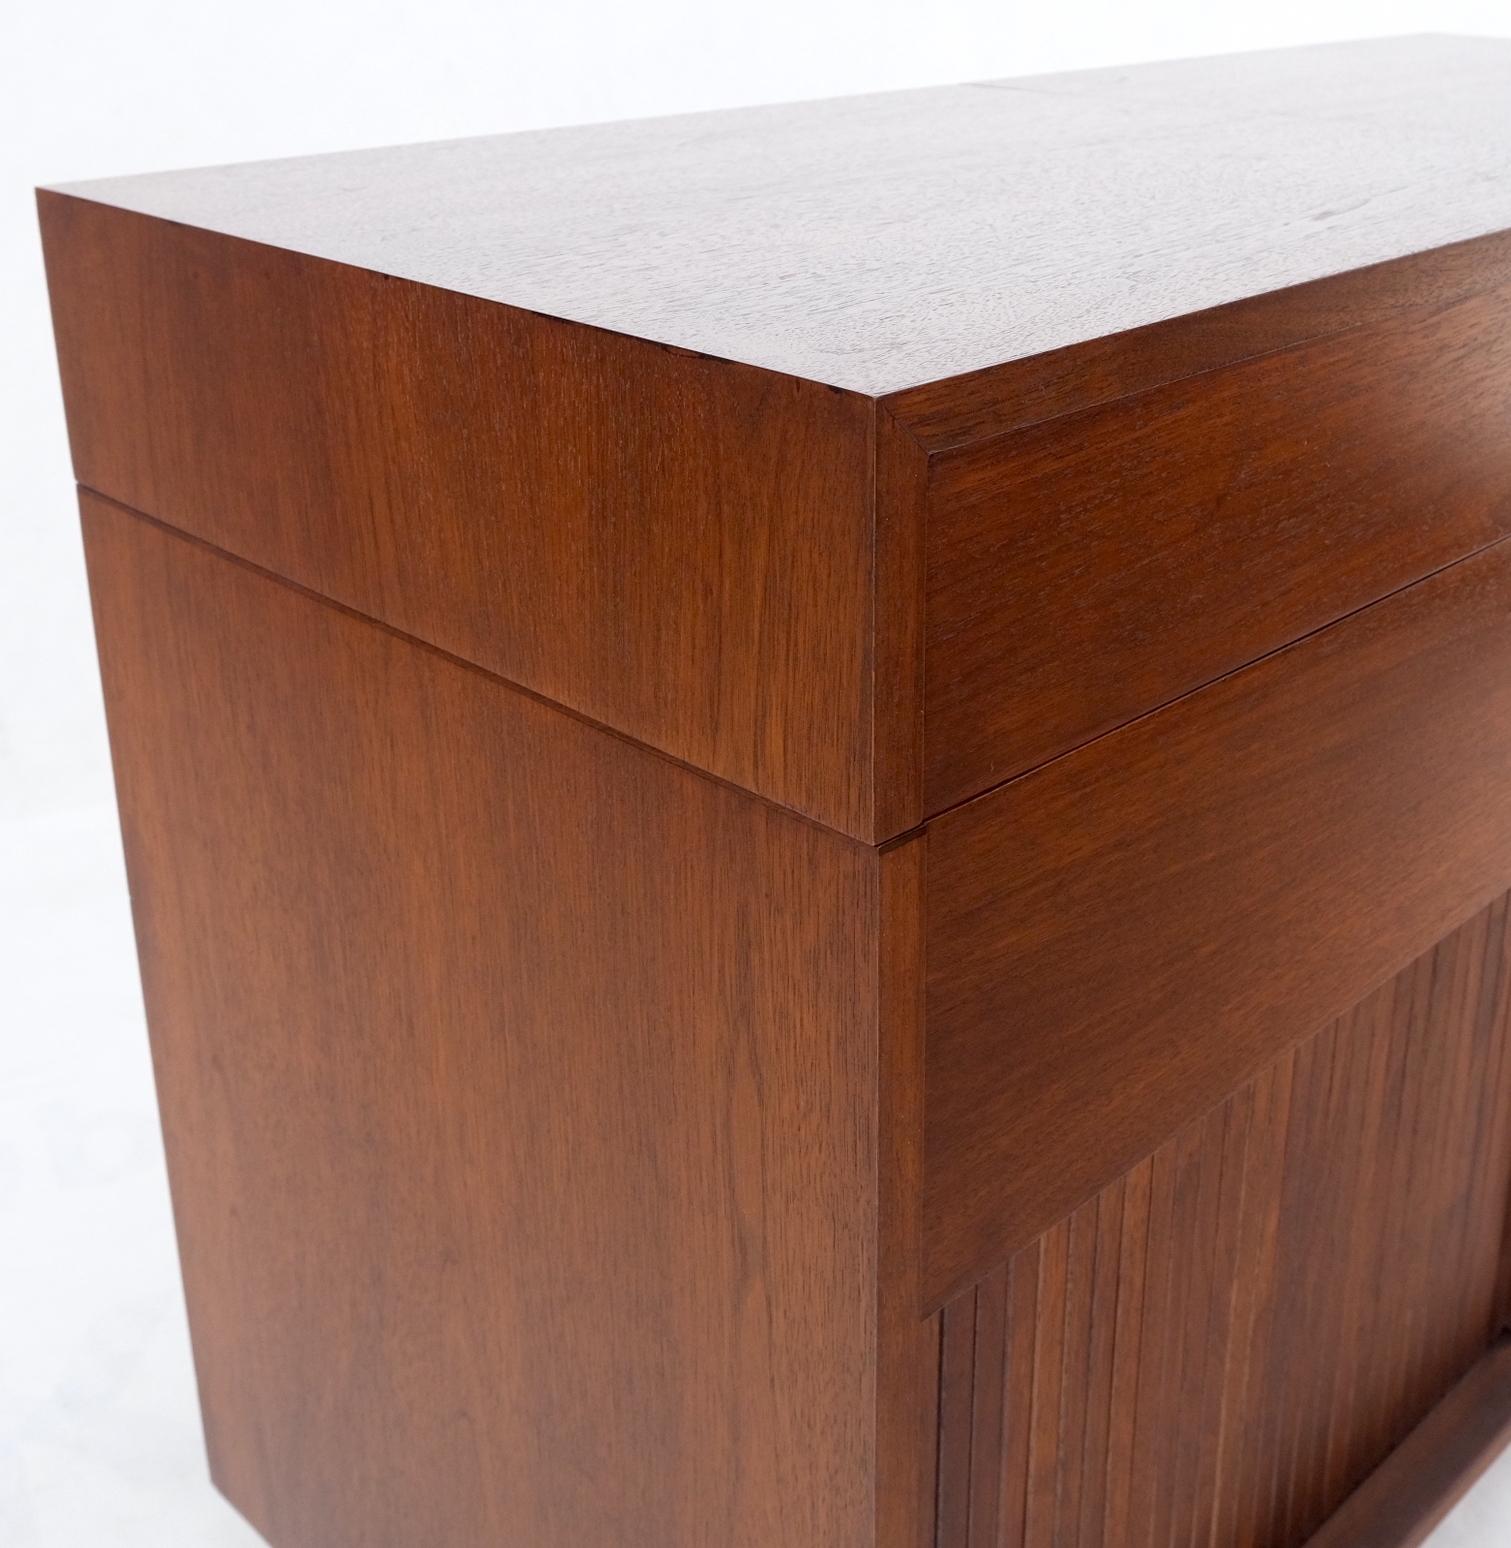 20th Century Restored Lift Top Turn Table Record Cabinet Credenza Tambour Door Compartment